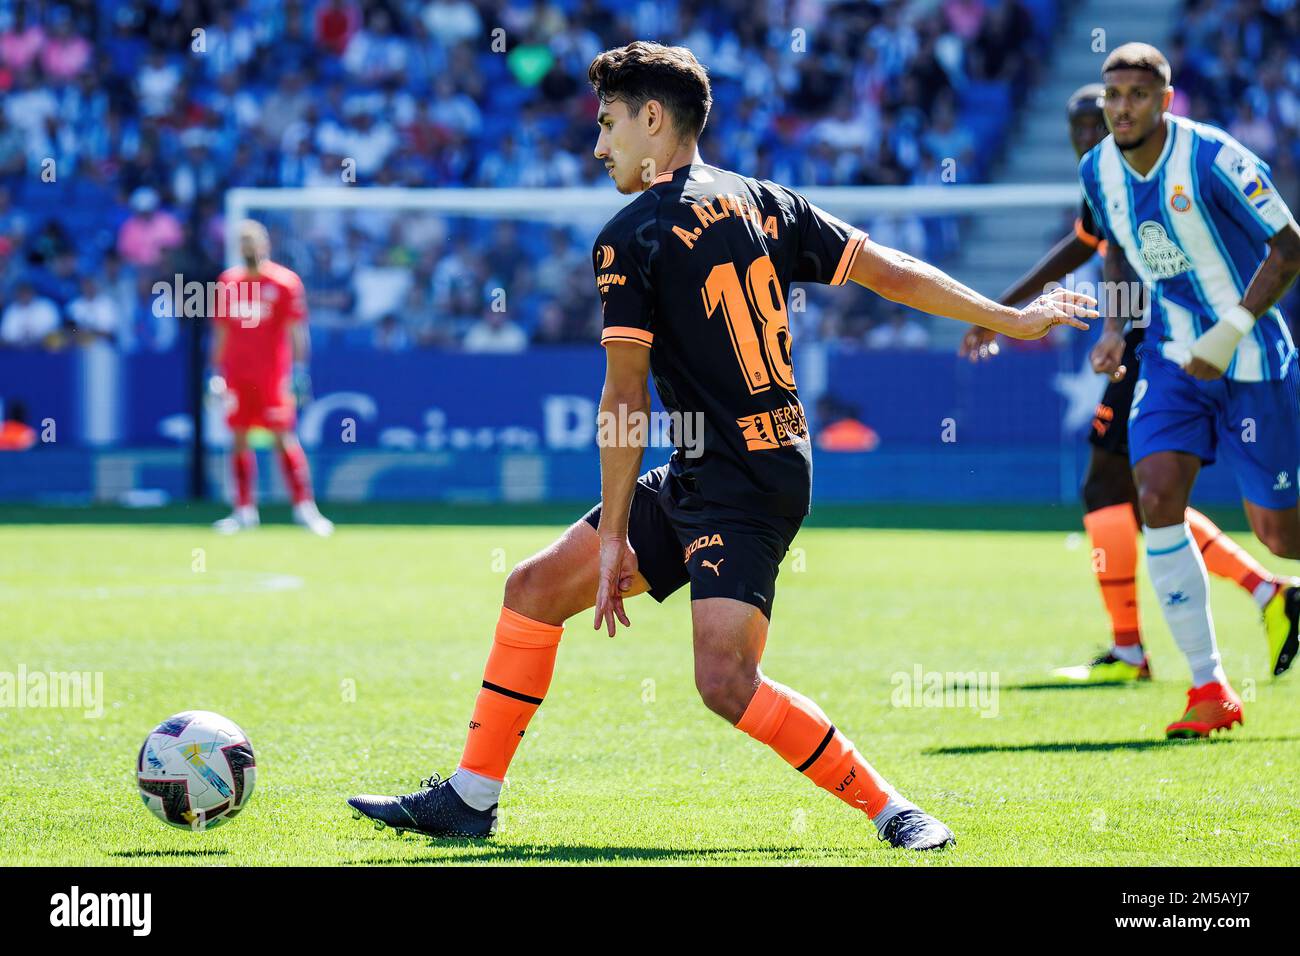 BARCELONA - OCT 2: Andre Almeida in action at the La Liga match between RCD Espanyol and Valencia CF at the RCDE Stadium on October 2, 2022 in Barcelo Stock Photo